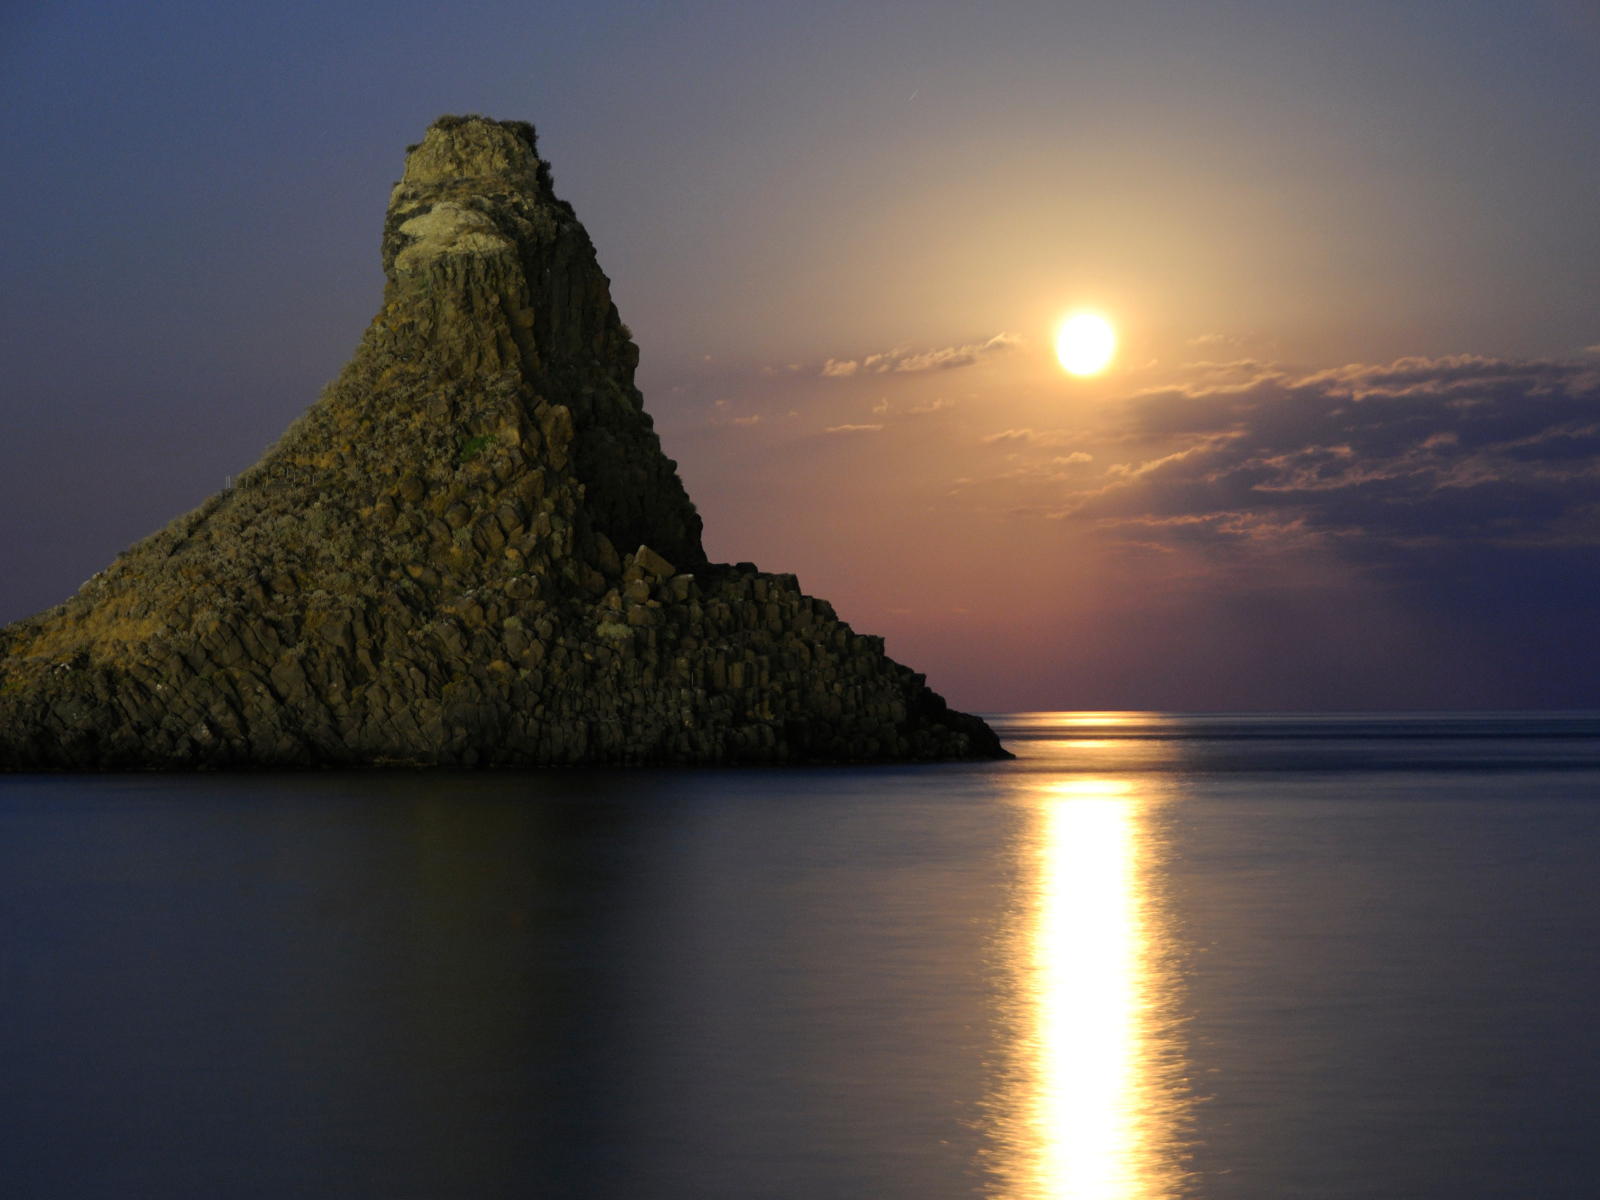 Moonlight over the sea off the island of Sicily, Italy